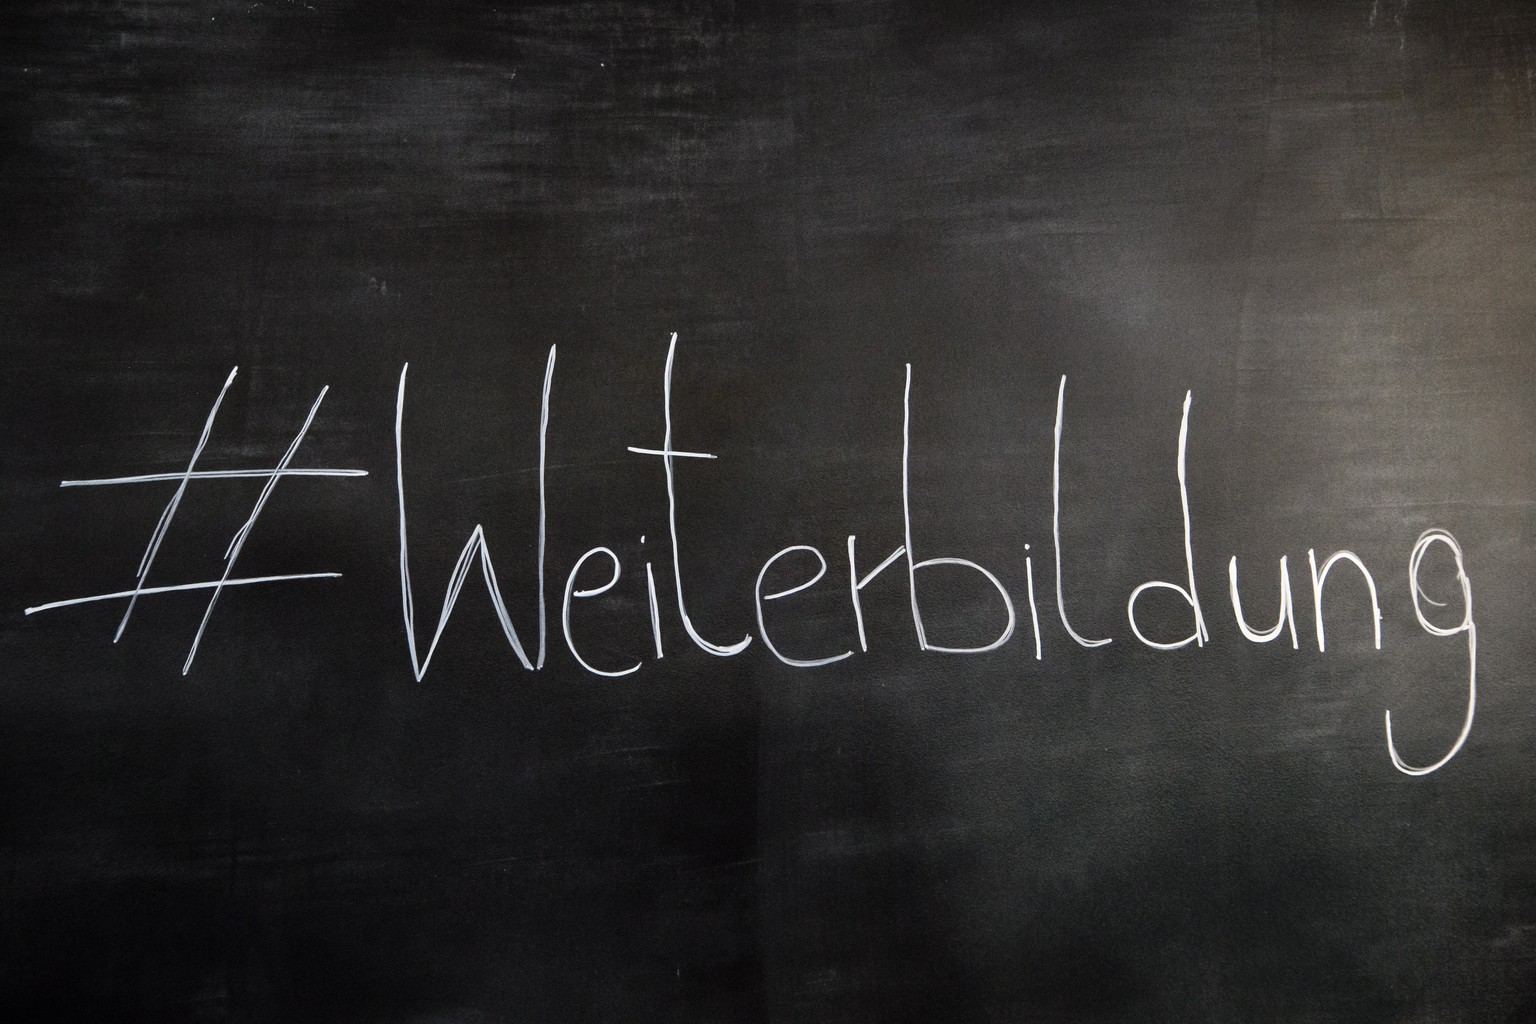 epa07643619 The hashtag Furterh Education (Weiterbildung) can be seen on a blackboard during a press conference on the national further education strategy in Berlin, Germany, 12 June 2019. German Mini ...